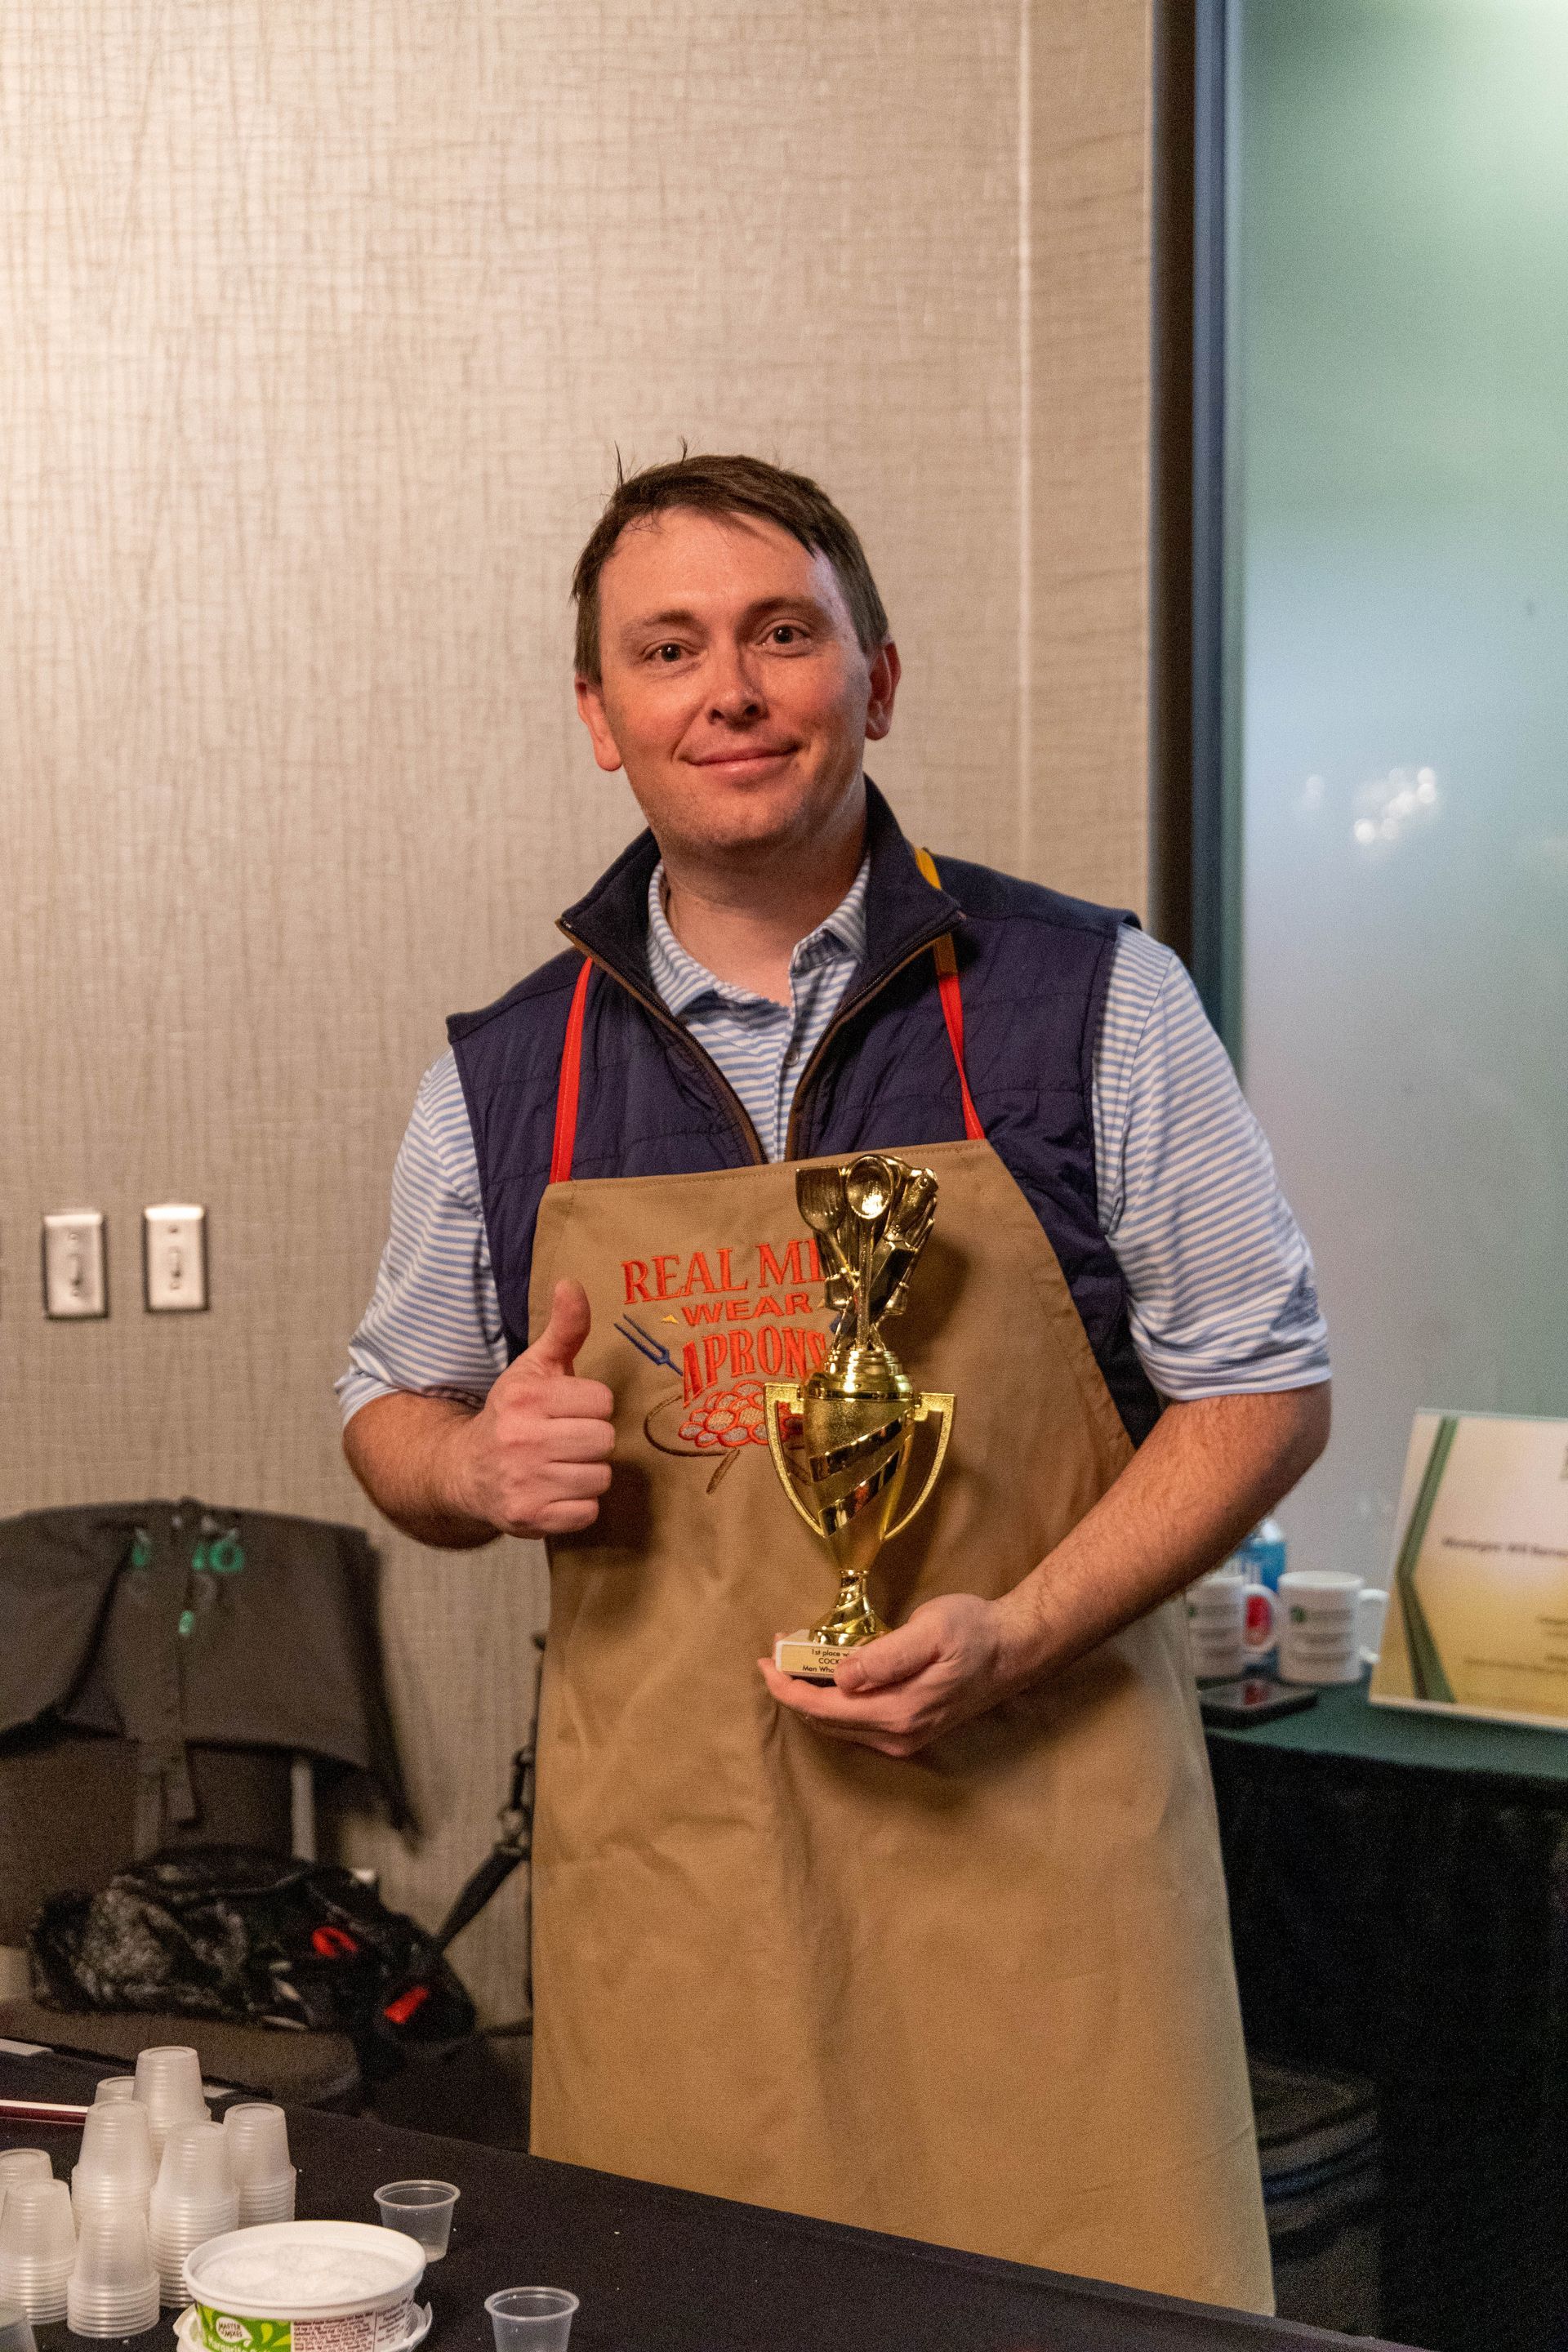 a man in an apron is holding a trophy and giving a thumbs up .